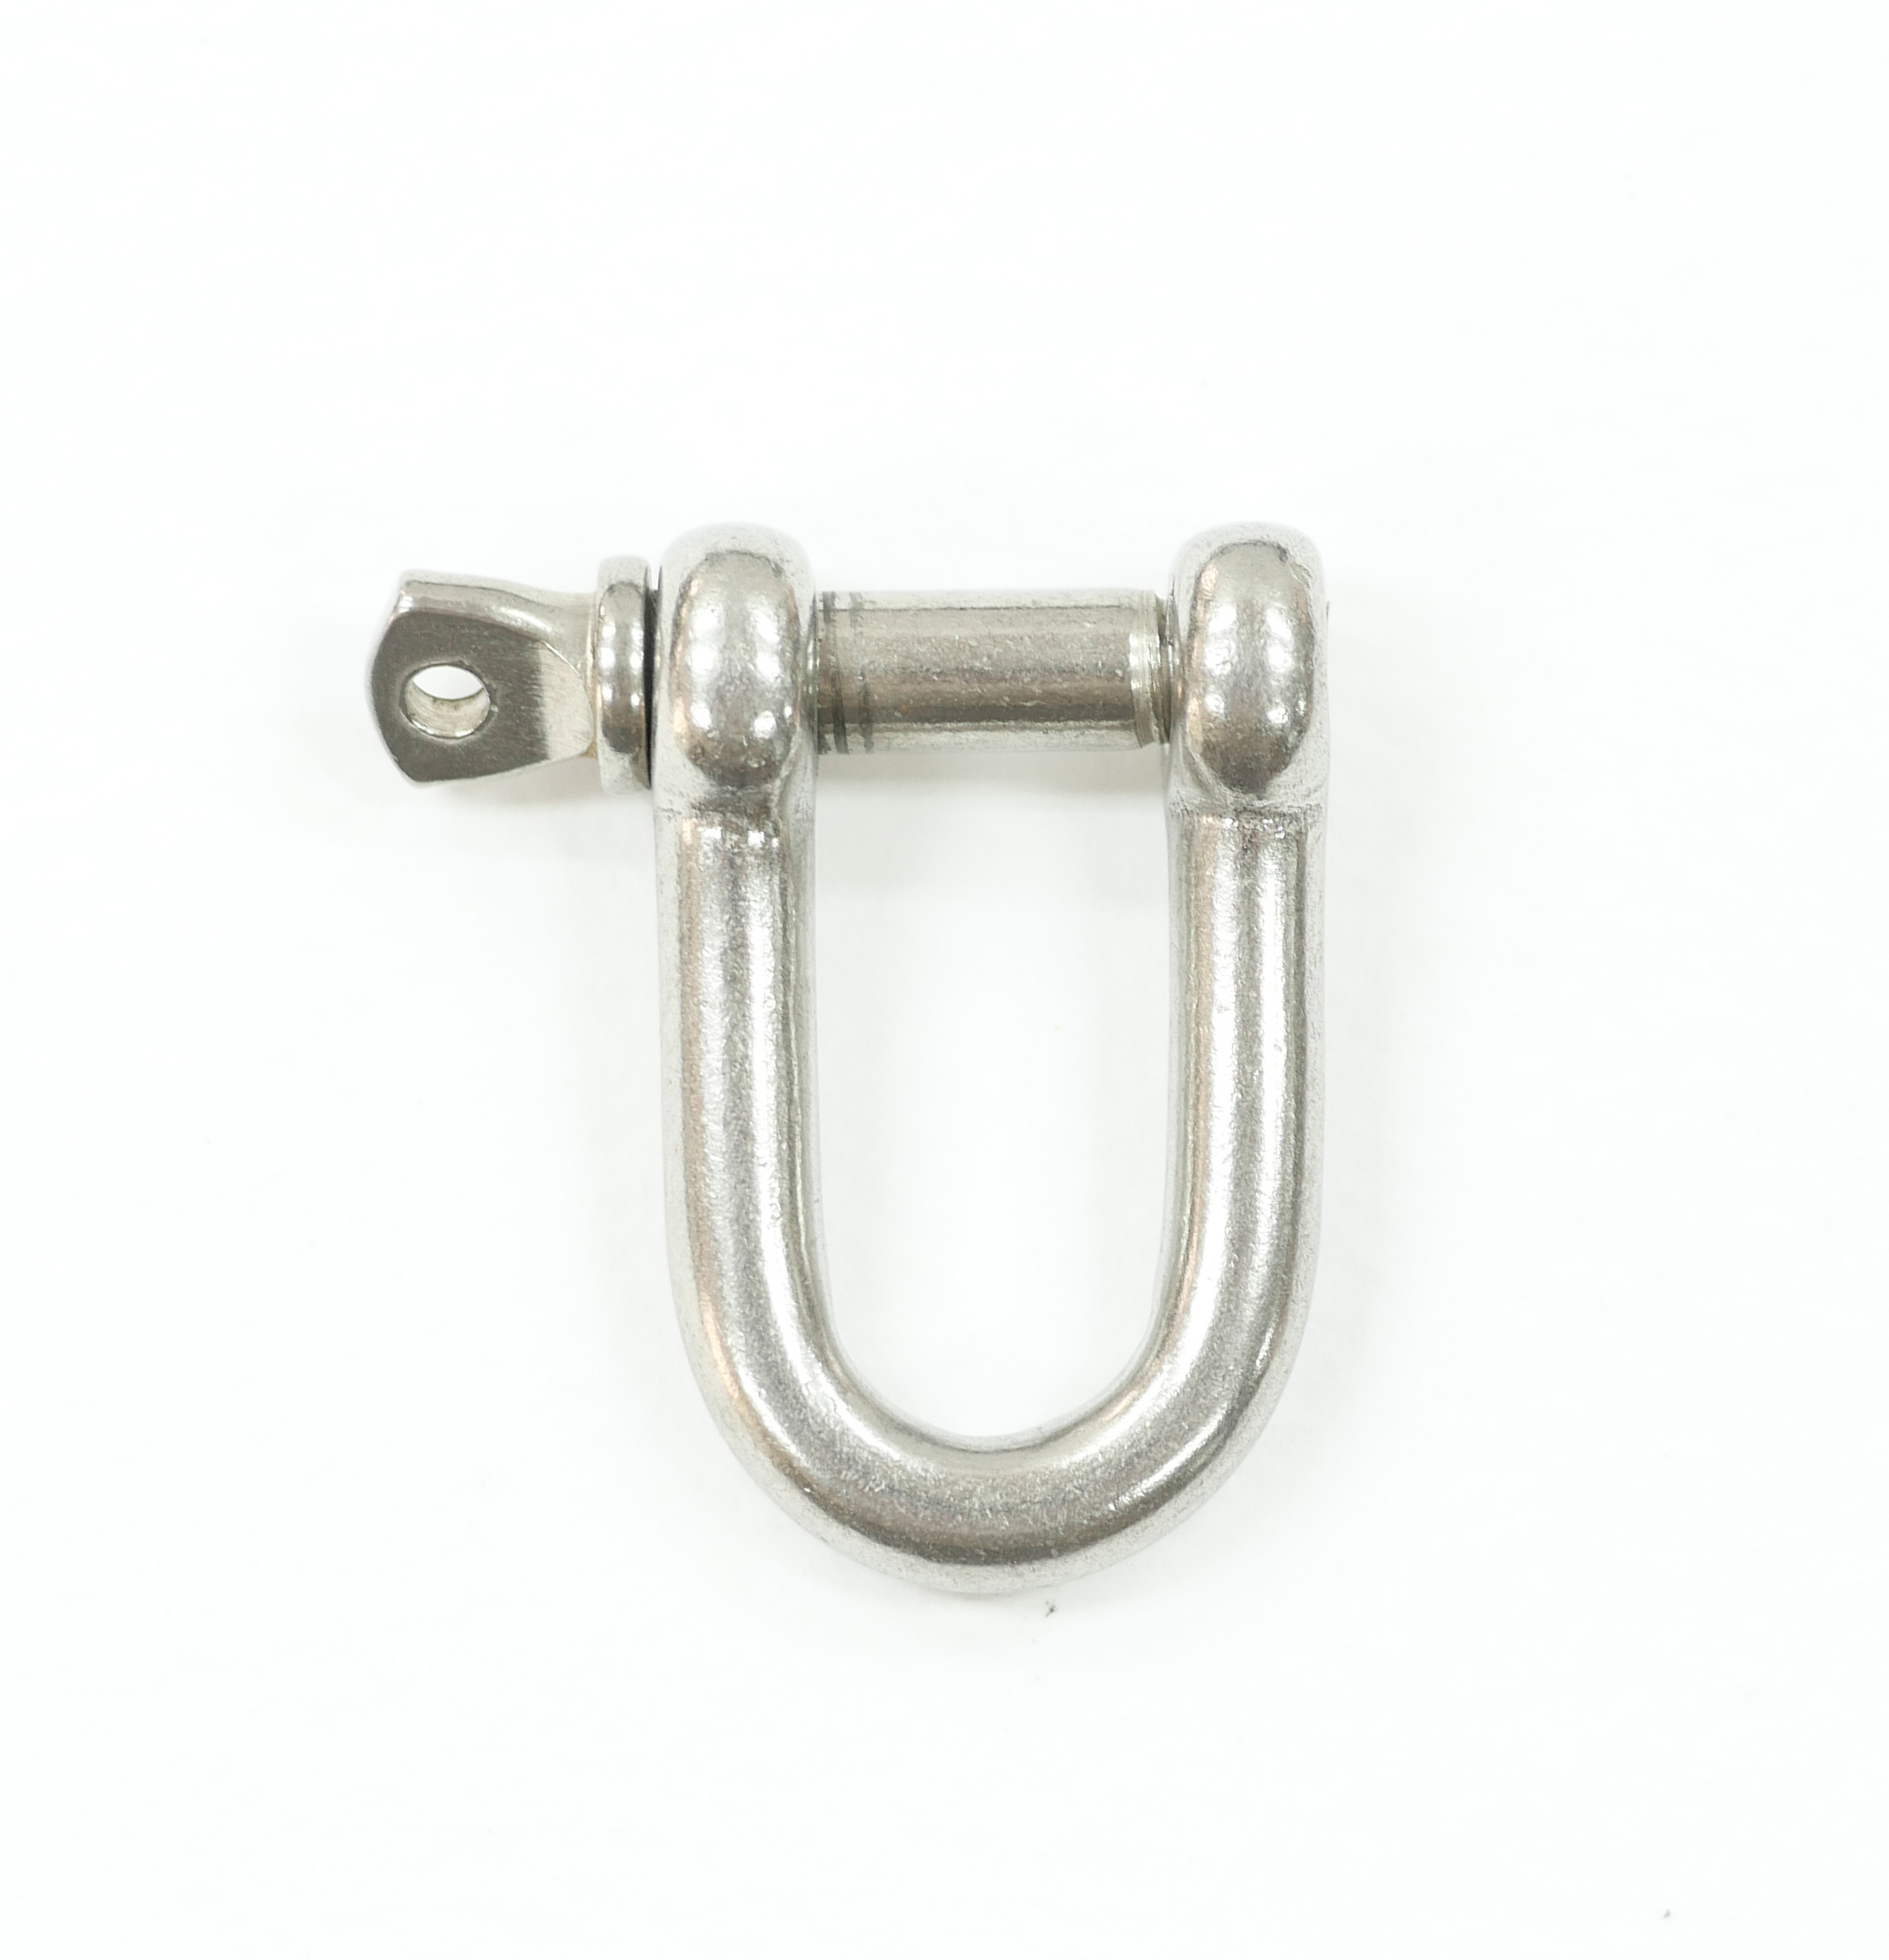 [TO] D shackle 1901-05